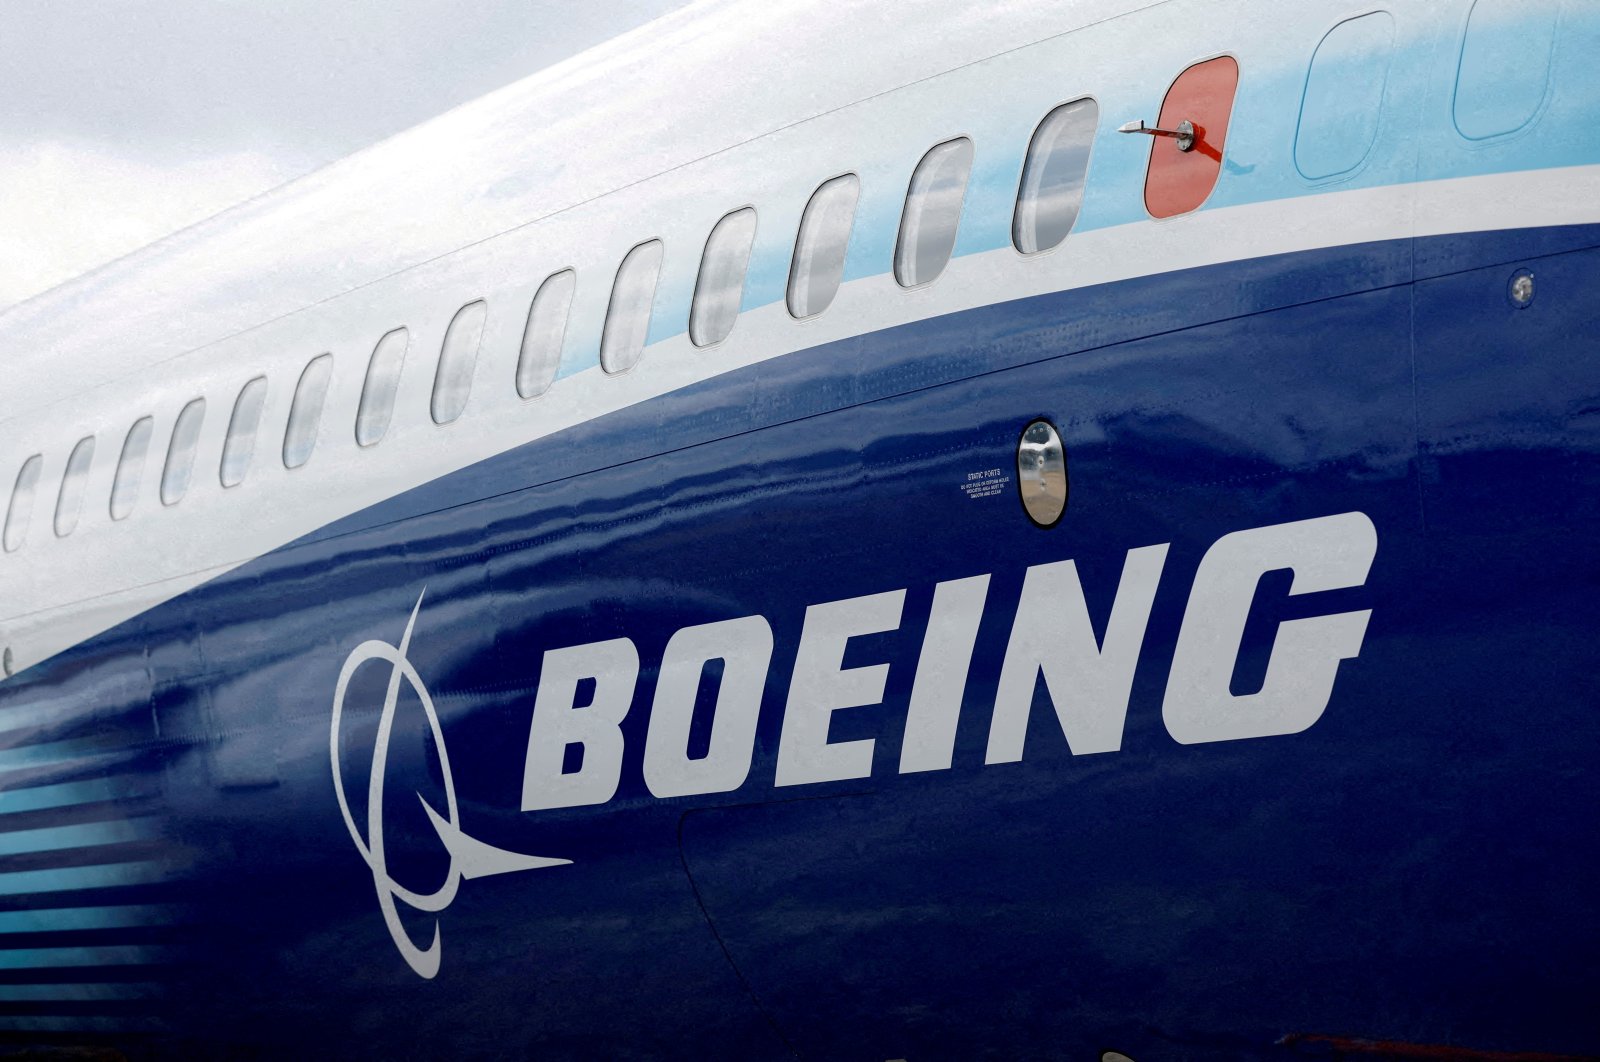 The Boeing logo is seen on the side of a Boeing 737 Max at the Farnborough International Airshow, Farnborough, Britain, July 20, 2022. (Reuters Photo)